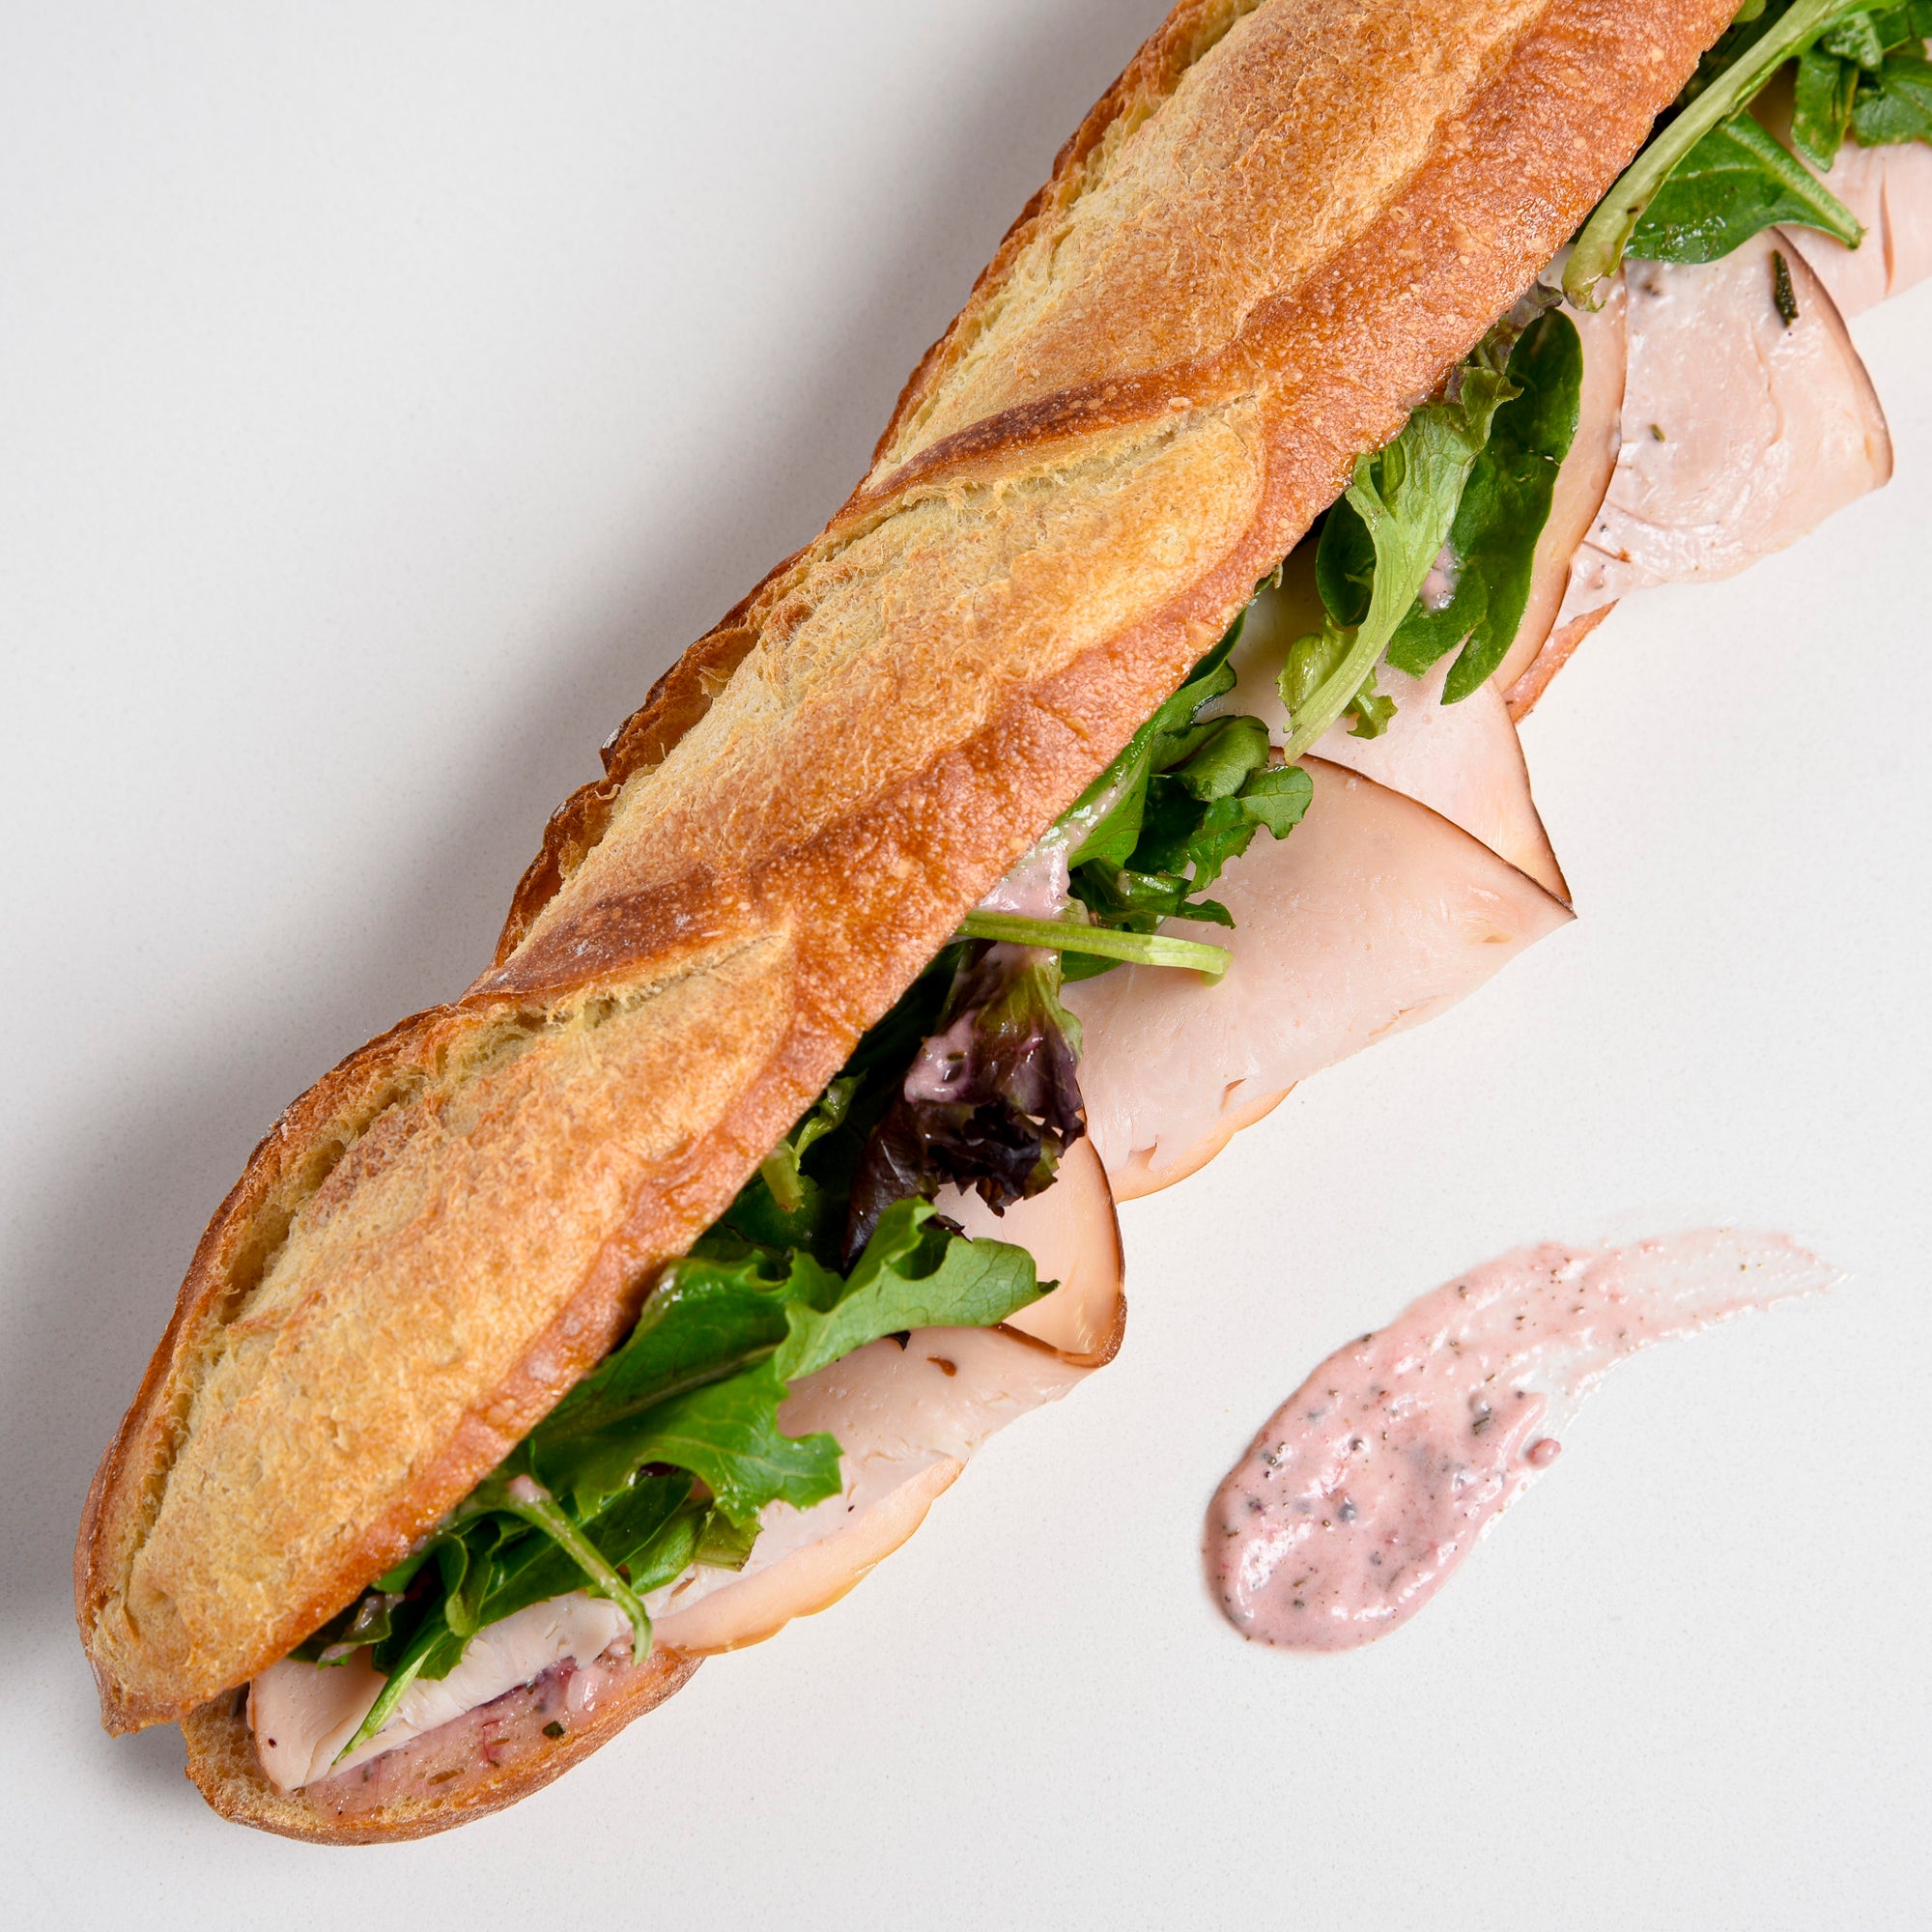 Le fournil bakery sandwich dinde canneberges smoked turkey with cranberry mayonnaise and lettuce close up